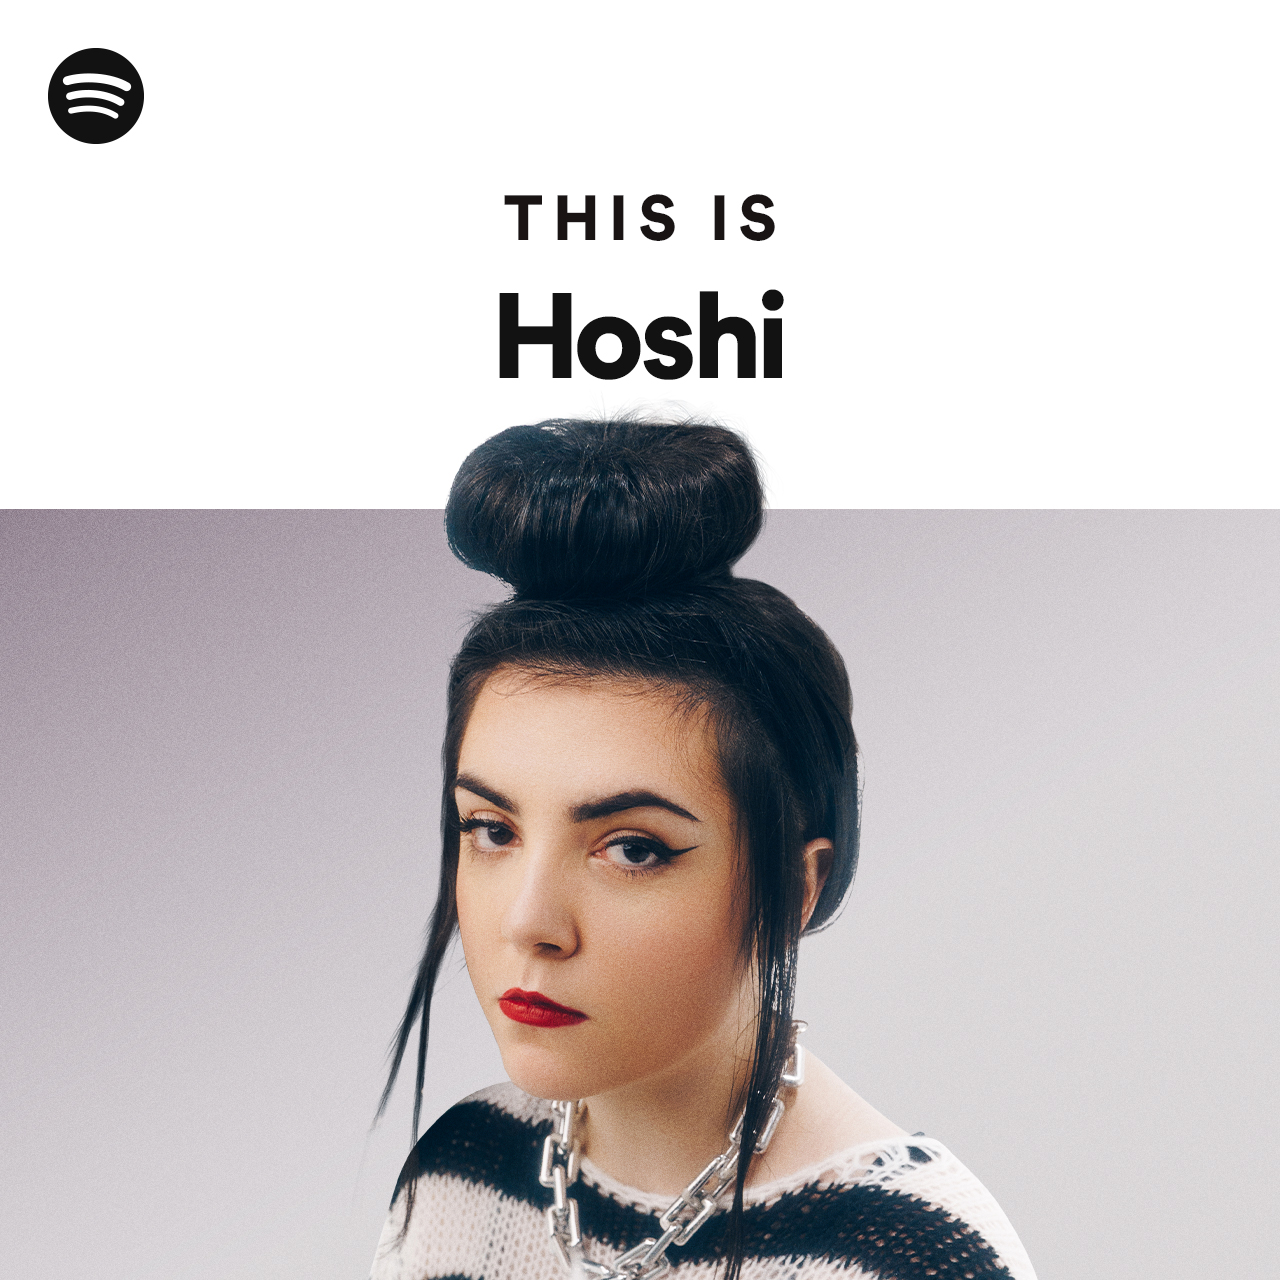 This Is Bosh - playlist by Spotify